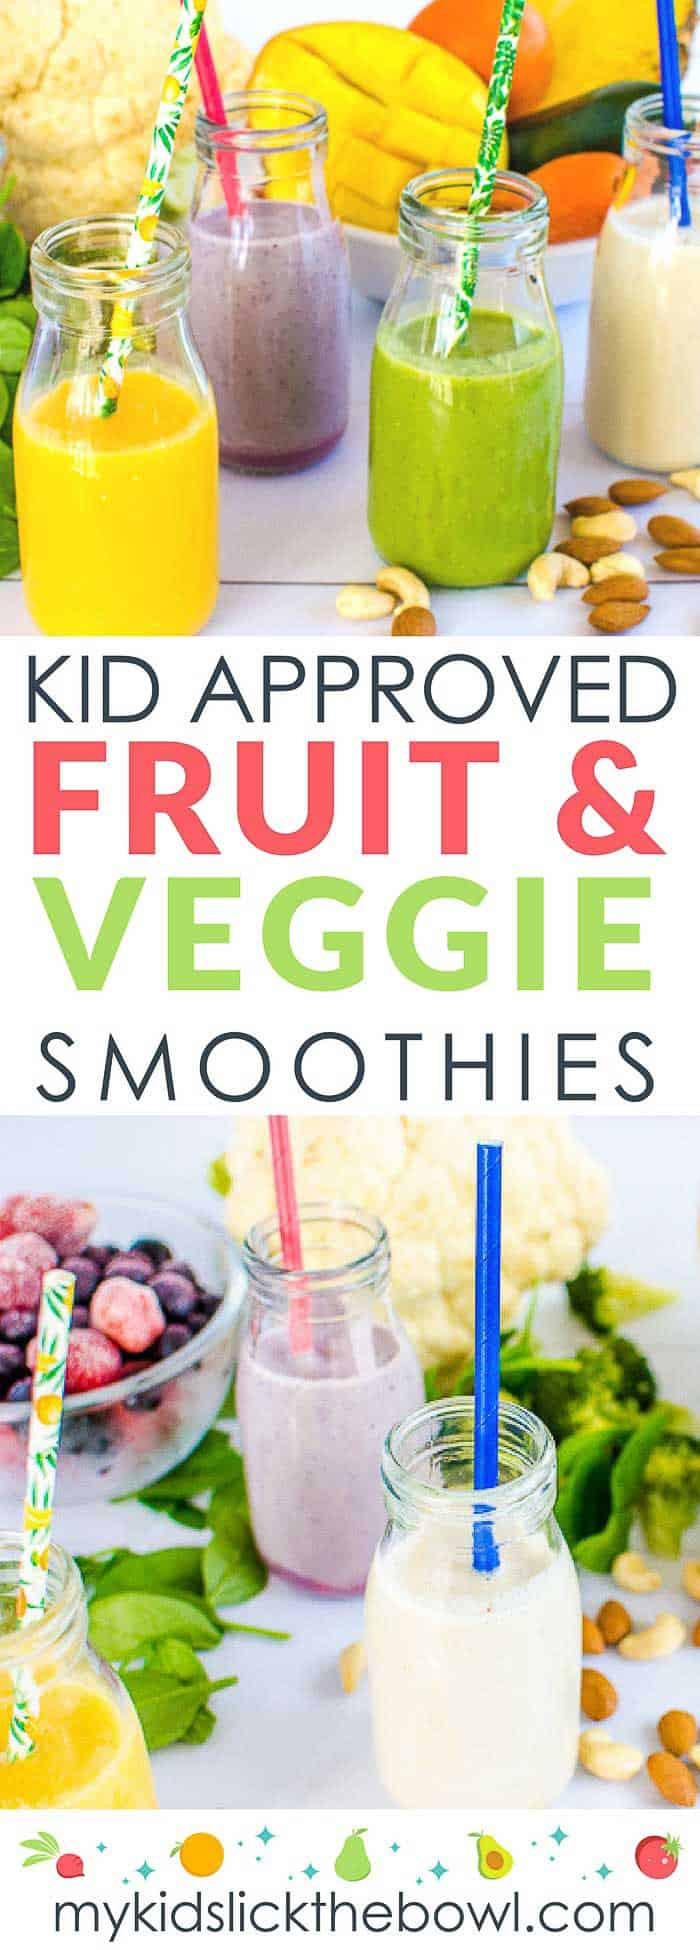 All Vegetable Smoothies
 Fruit and Veggie Smoothies For Kids